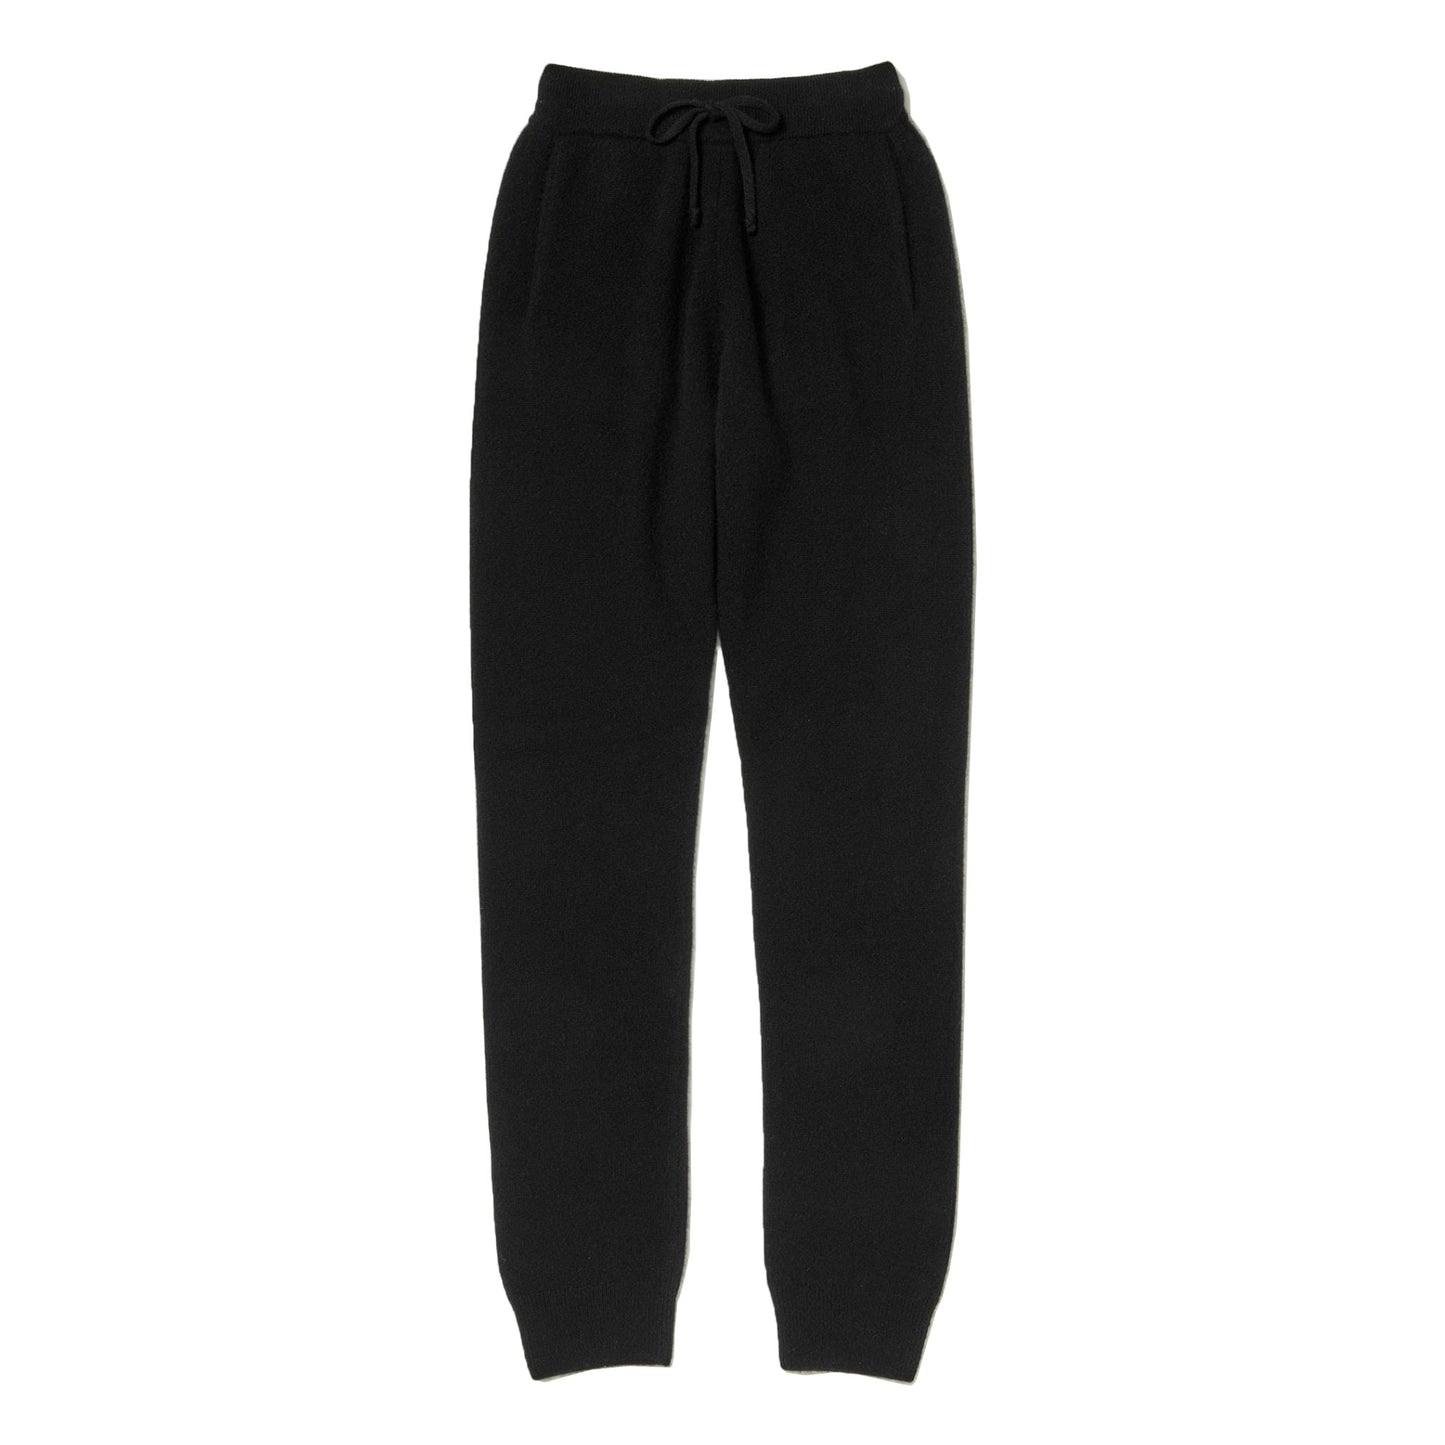 AURALEE/BABY CASHMERE KNIT PANTS